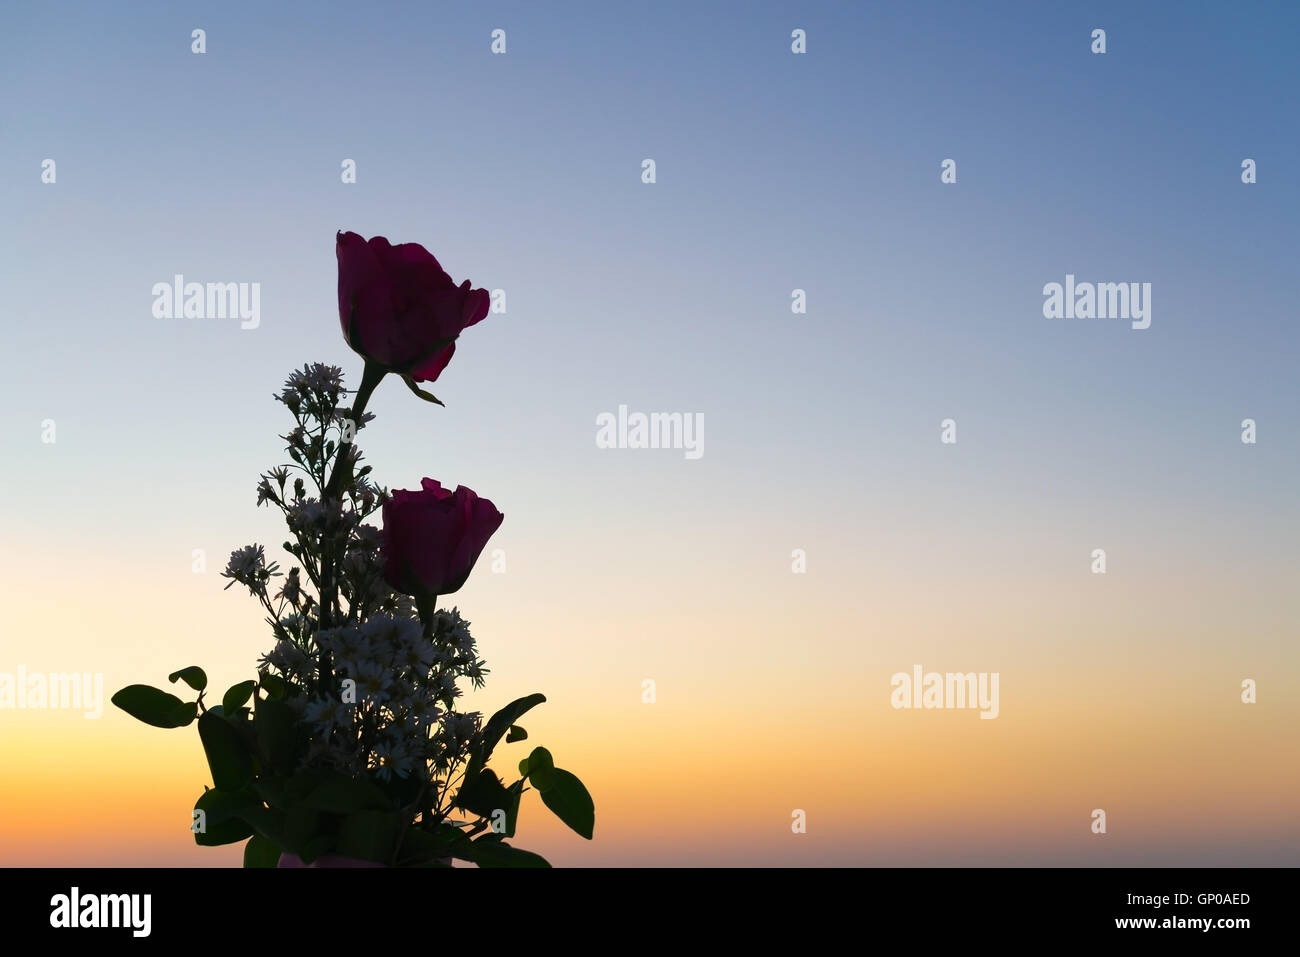 silhouette of flowers and plants on sunset or sunrise background. Stock Photo